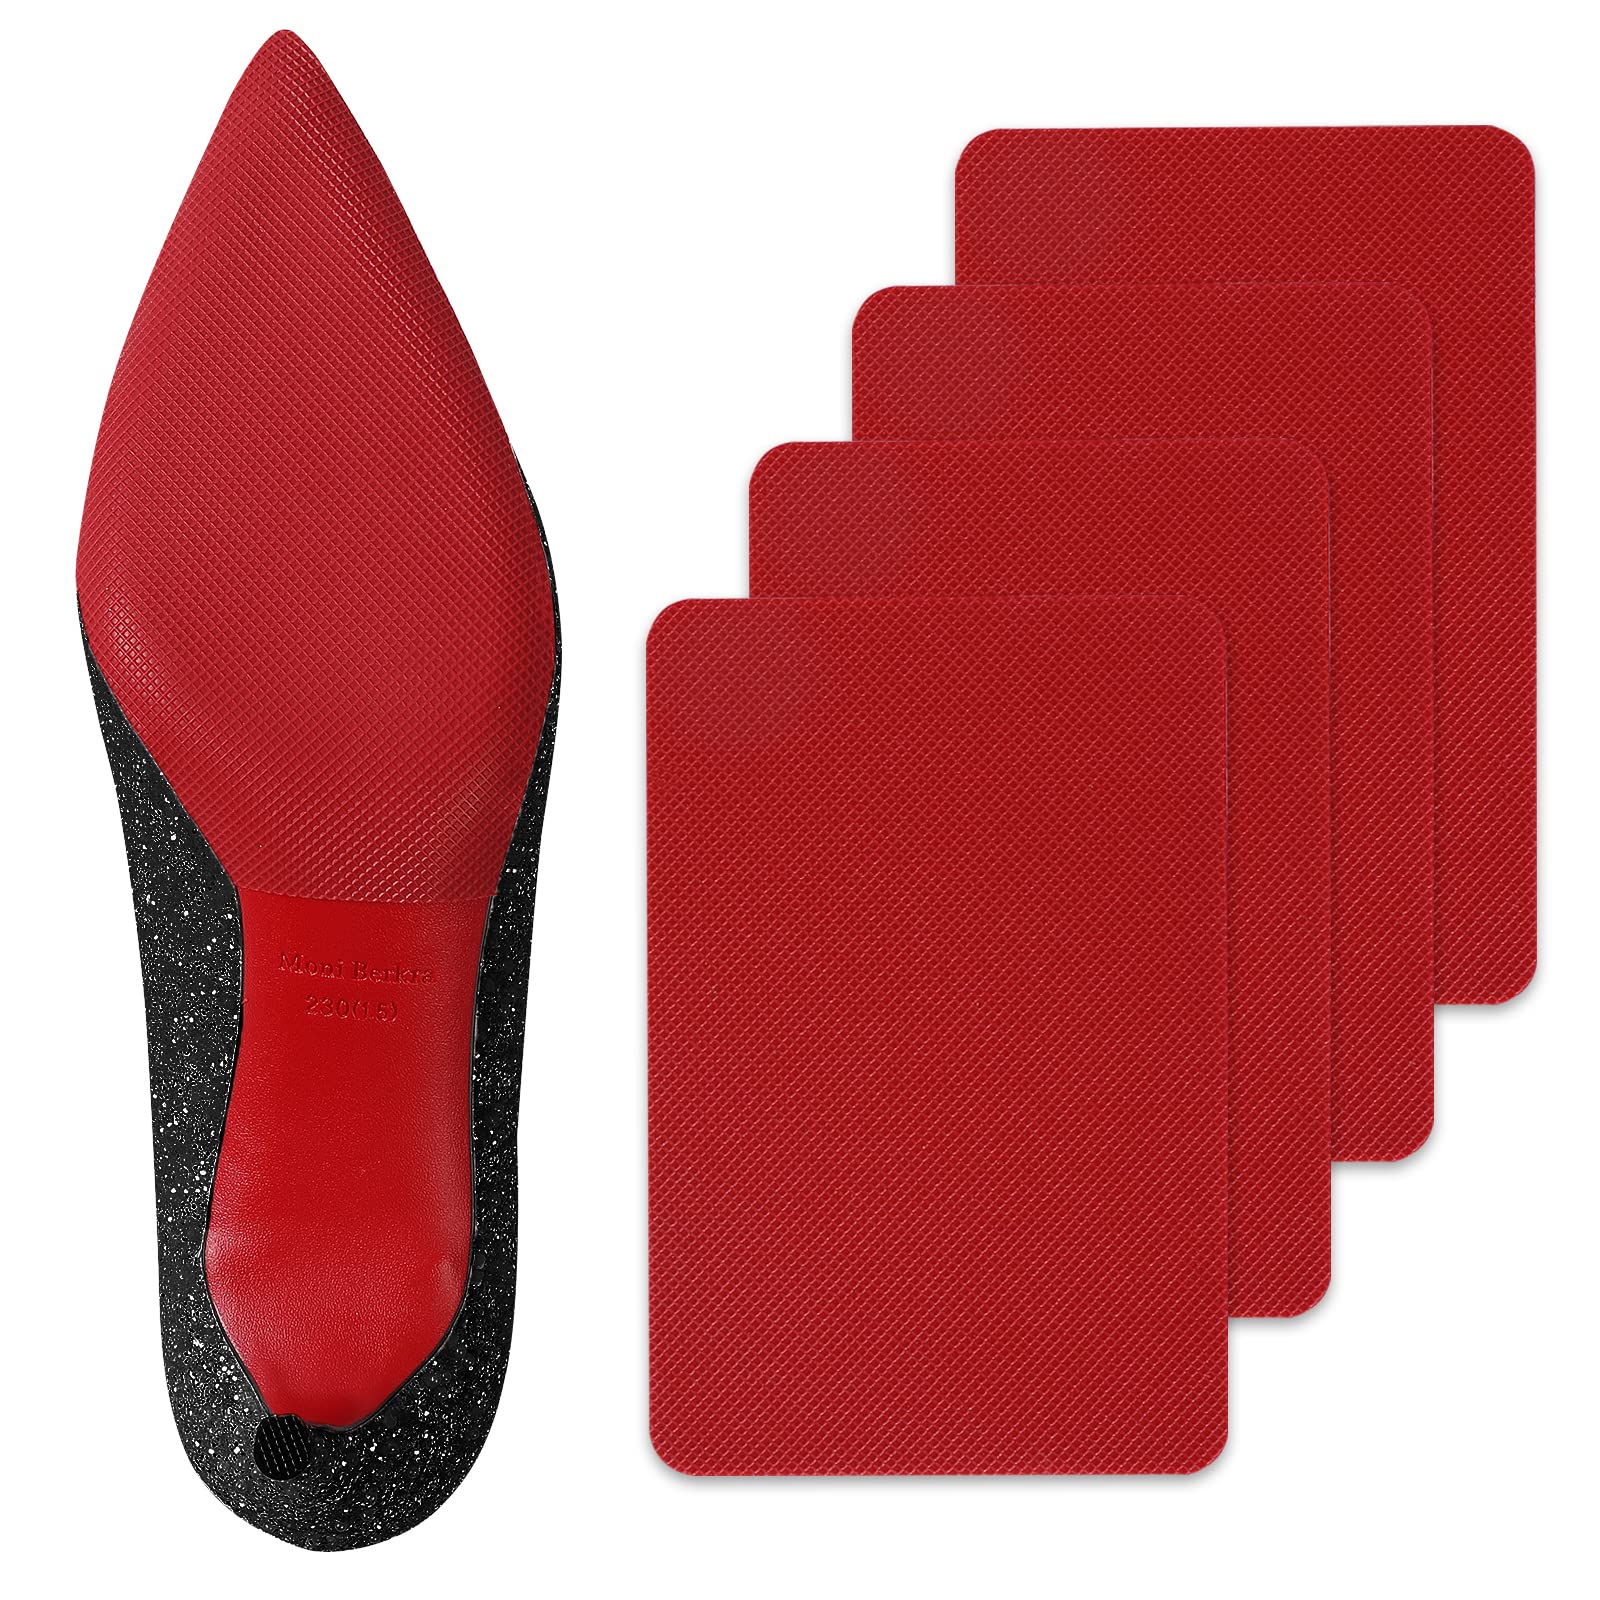 Men’s Shoe Sole Protector Red Sole Clear Protective Sticker Quality  Louboutin